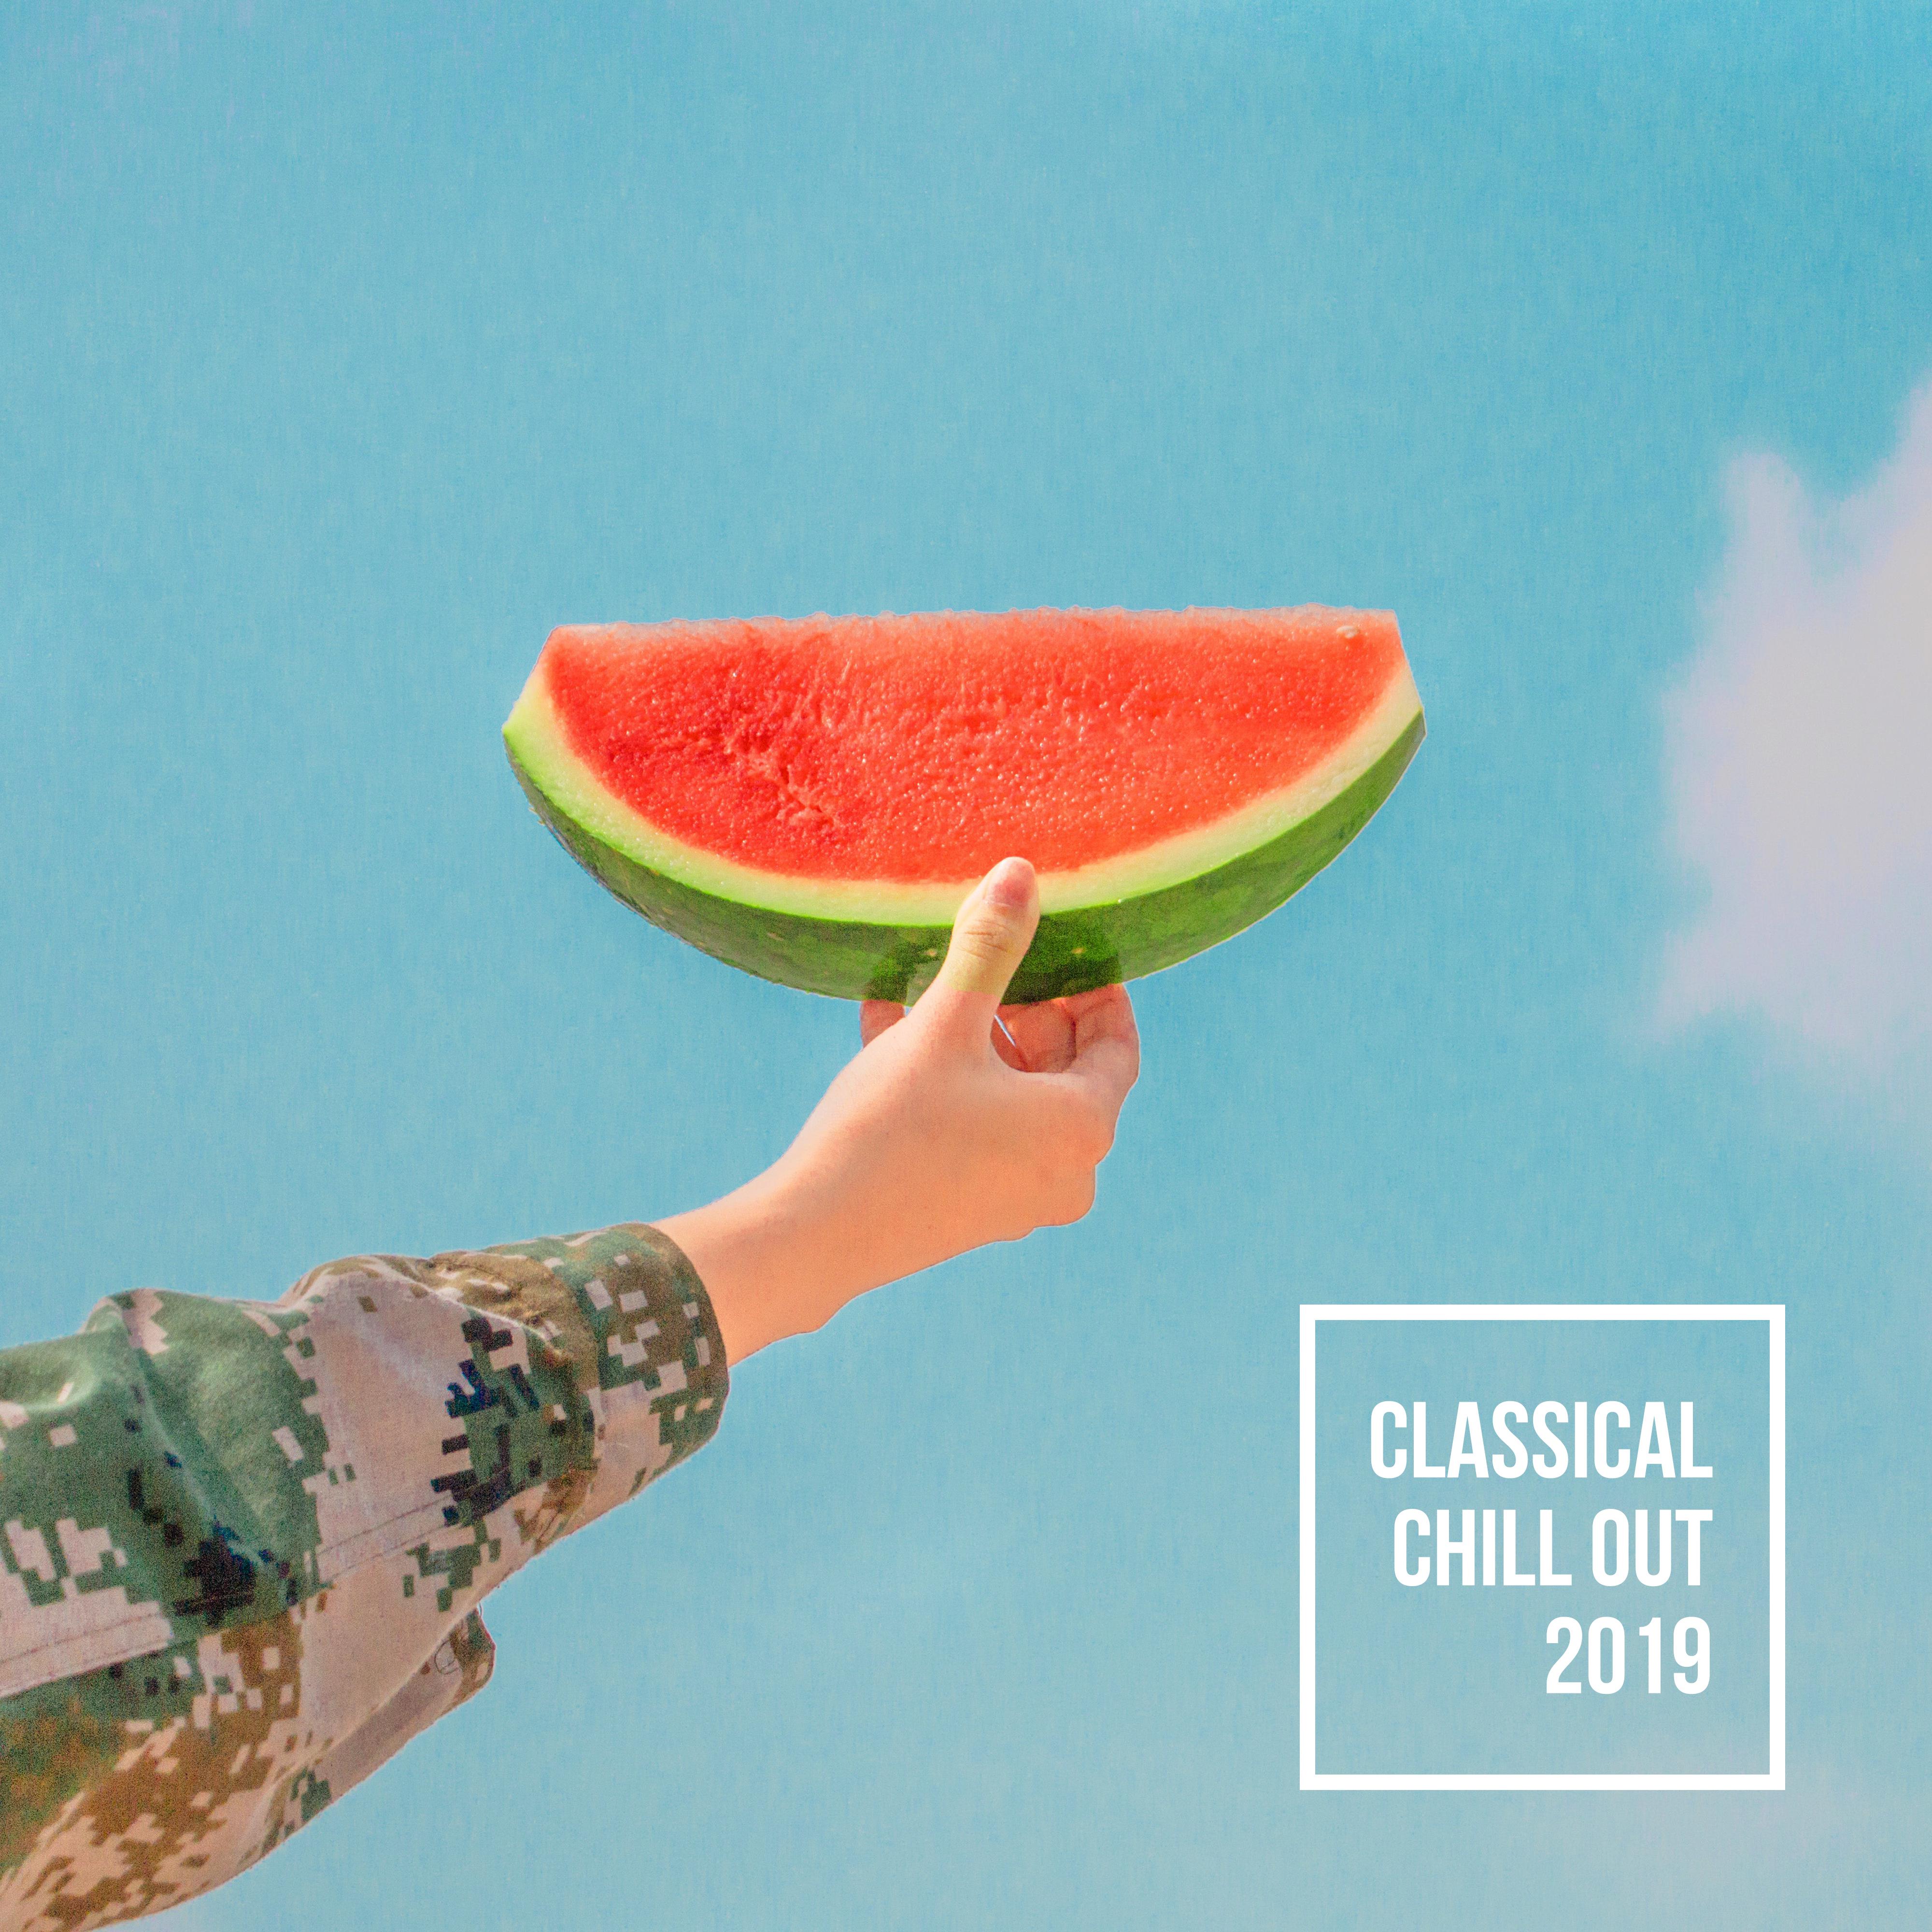 Classical Chill Out 2019 – Summer Melodies to Calm Down, Beach Music, Chillout Sounds for Relaxation, Unlimited Chillout Vibes